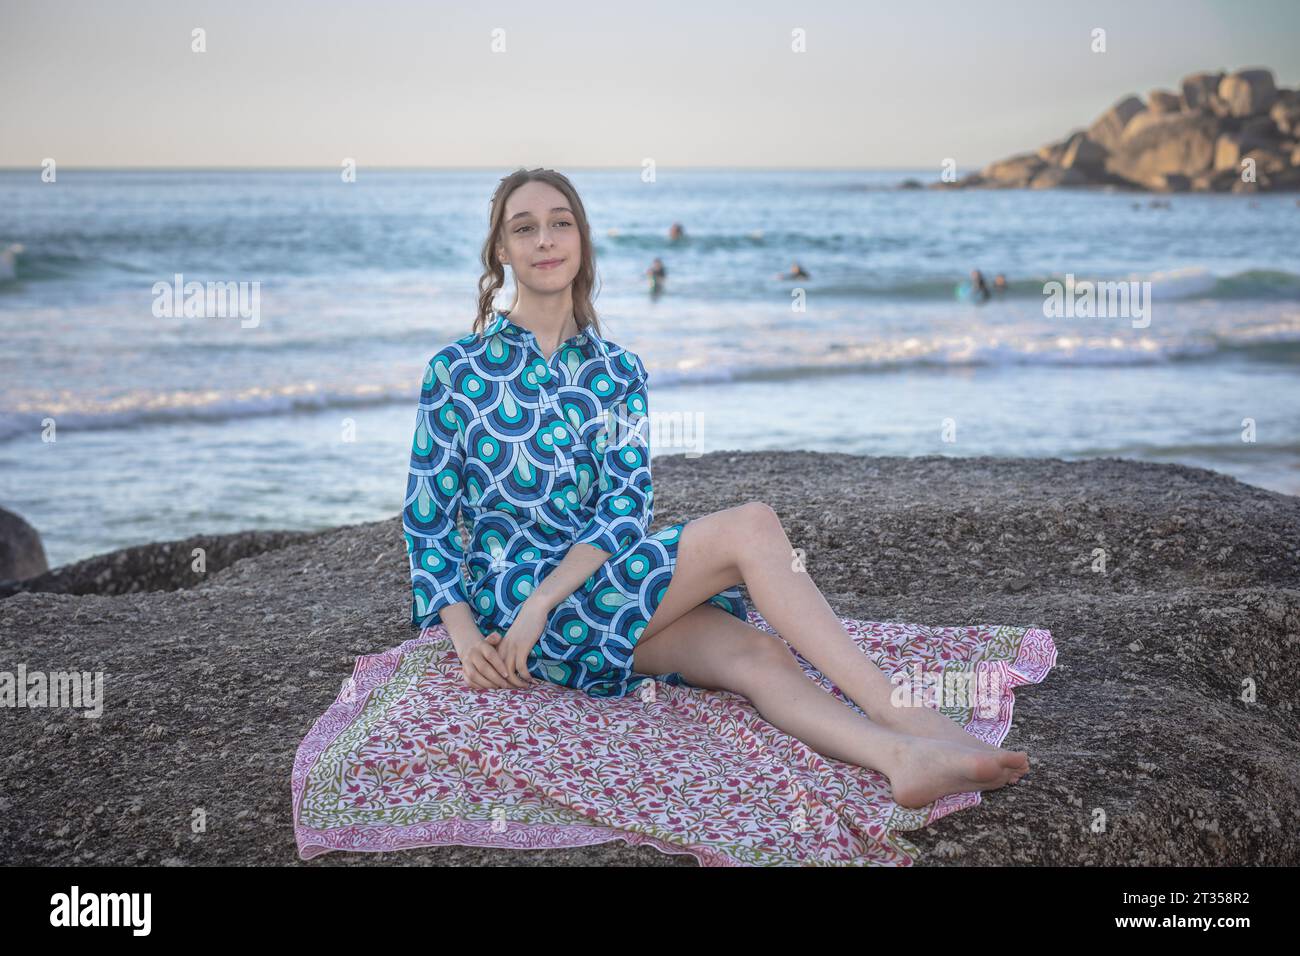 In the late afternoon glow, a 20-year-old Caucasian woman sits on a beach boulder, adorned in a vibrant, patterned shirt dress Stock Photo